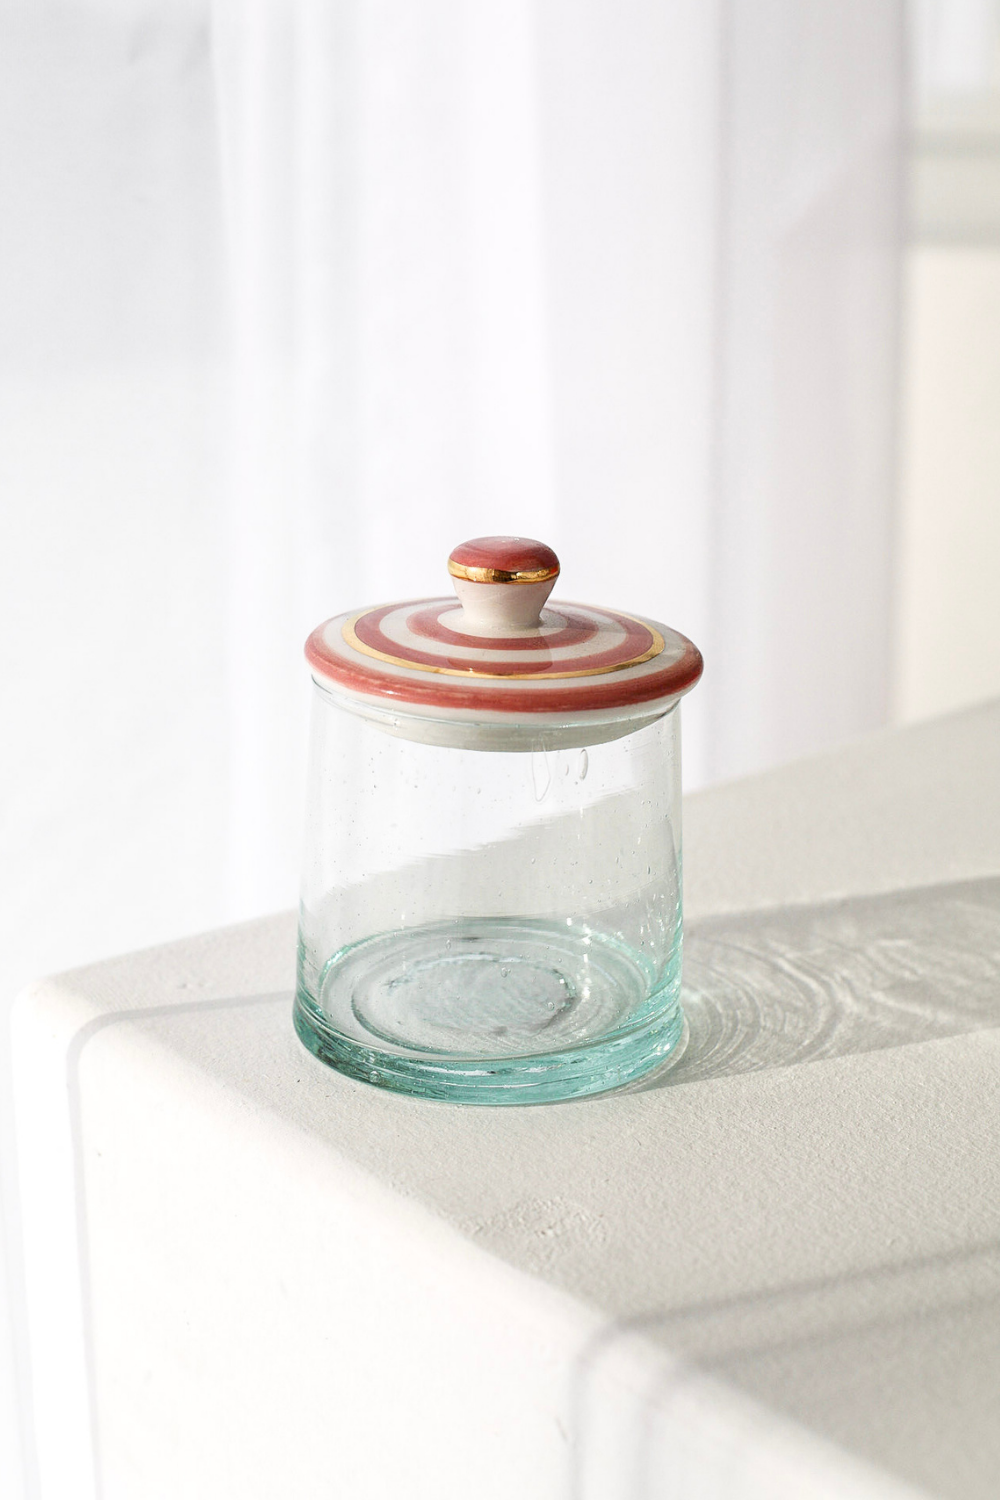 MARRAKECH ROUND GLASS WITH CERAMIC LID STRIPED PINK GOLD - Luxe B Co